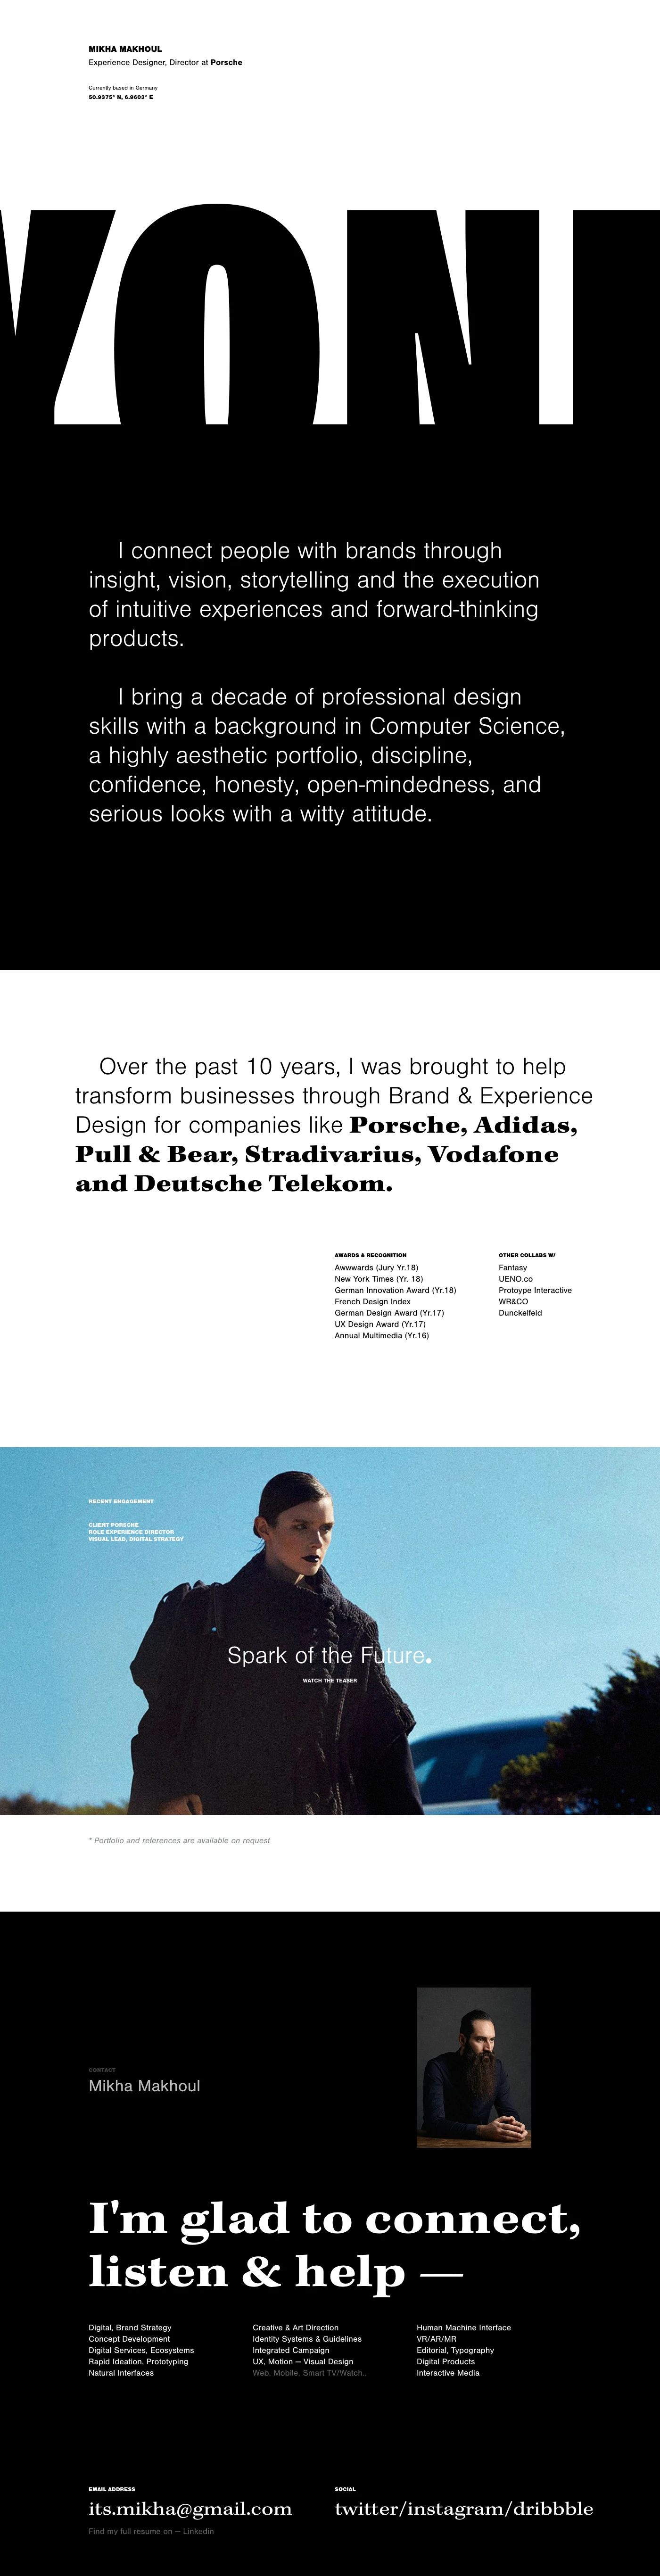 Mikha Makhoul Landing Page Example: Experience Designer, Director at Porsche. I'm glad to connect, listen & help.